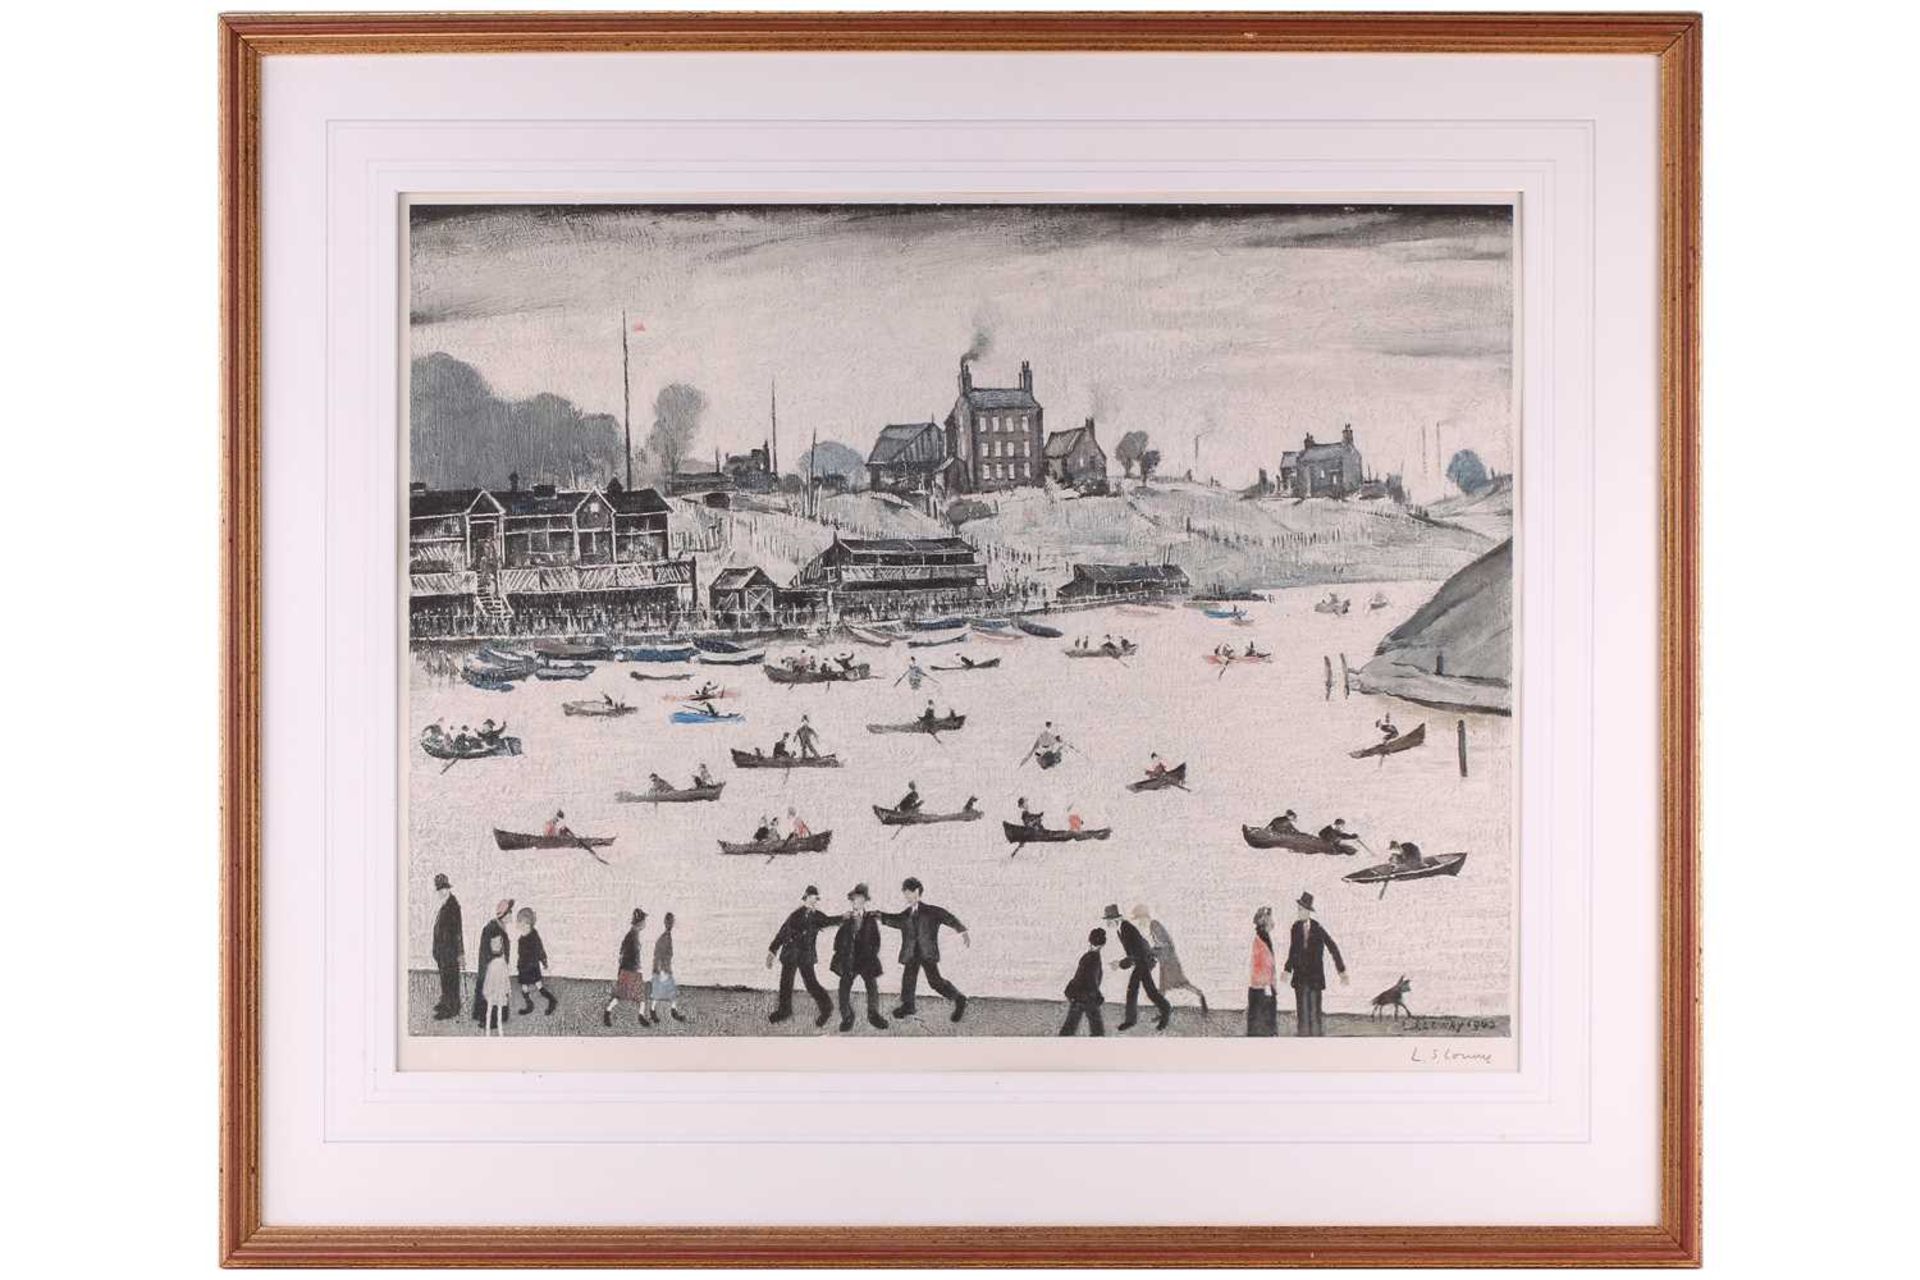 Laurence Stephen Lowry RA (1887-1976) British, 'Crime Lake', limited edition print, signed in pencil